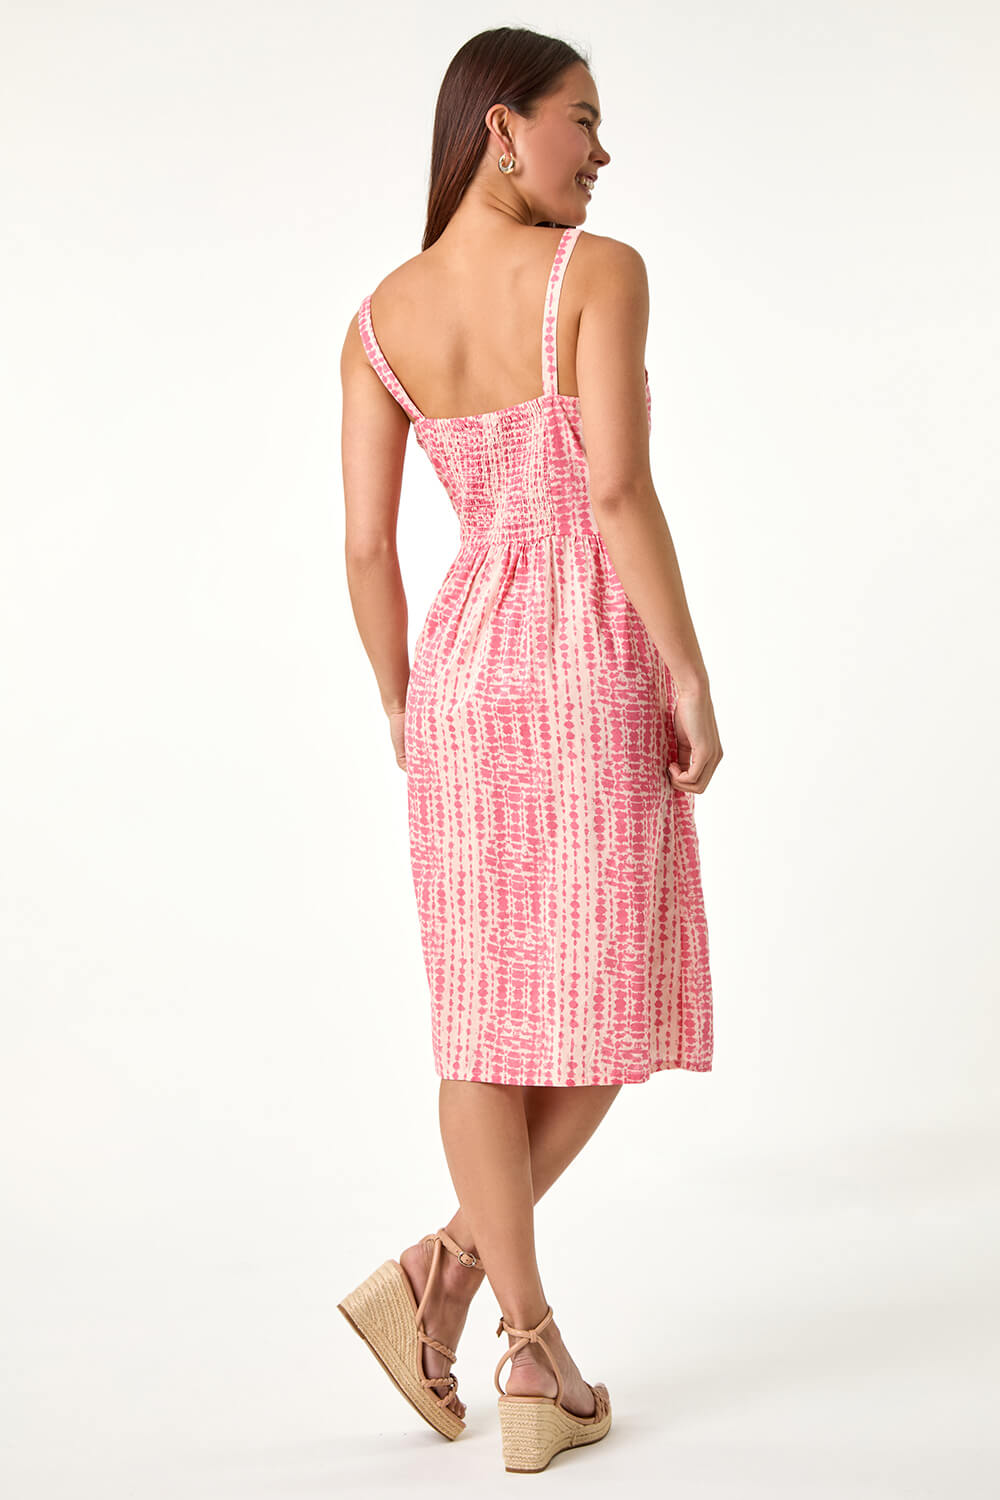 PINK Petite Tie Dye Button Front Dress, Image 3 of 5